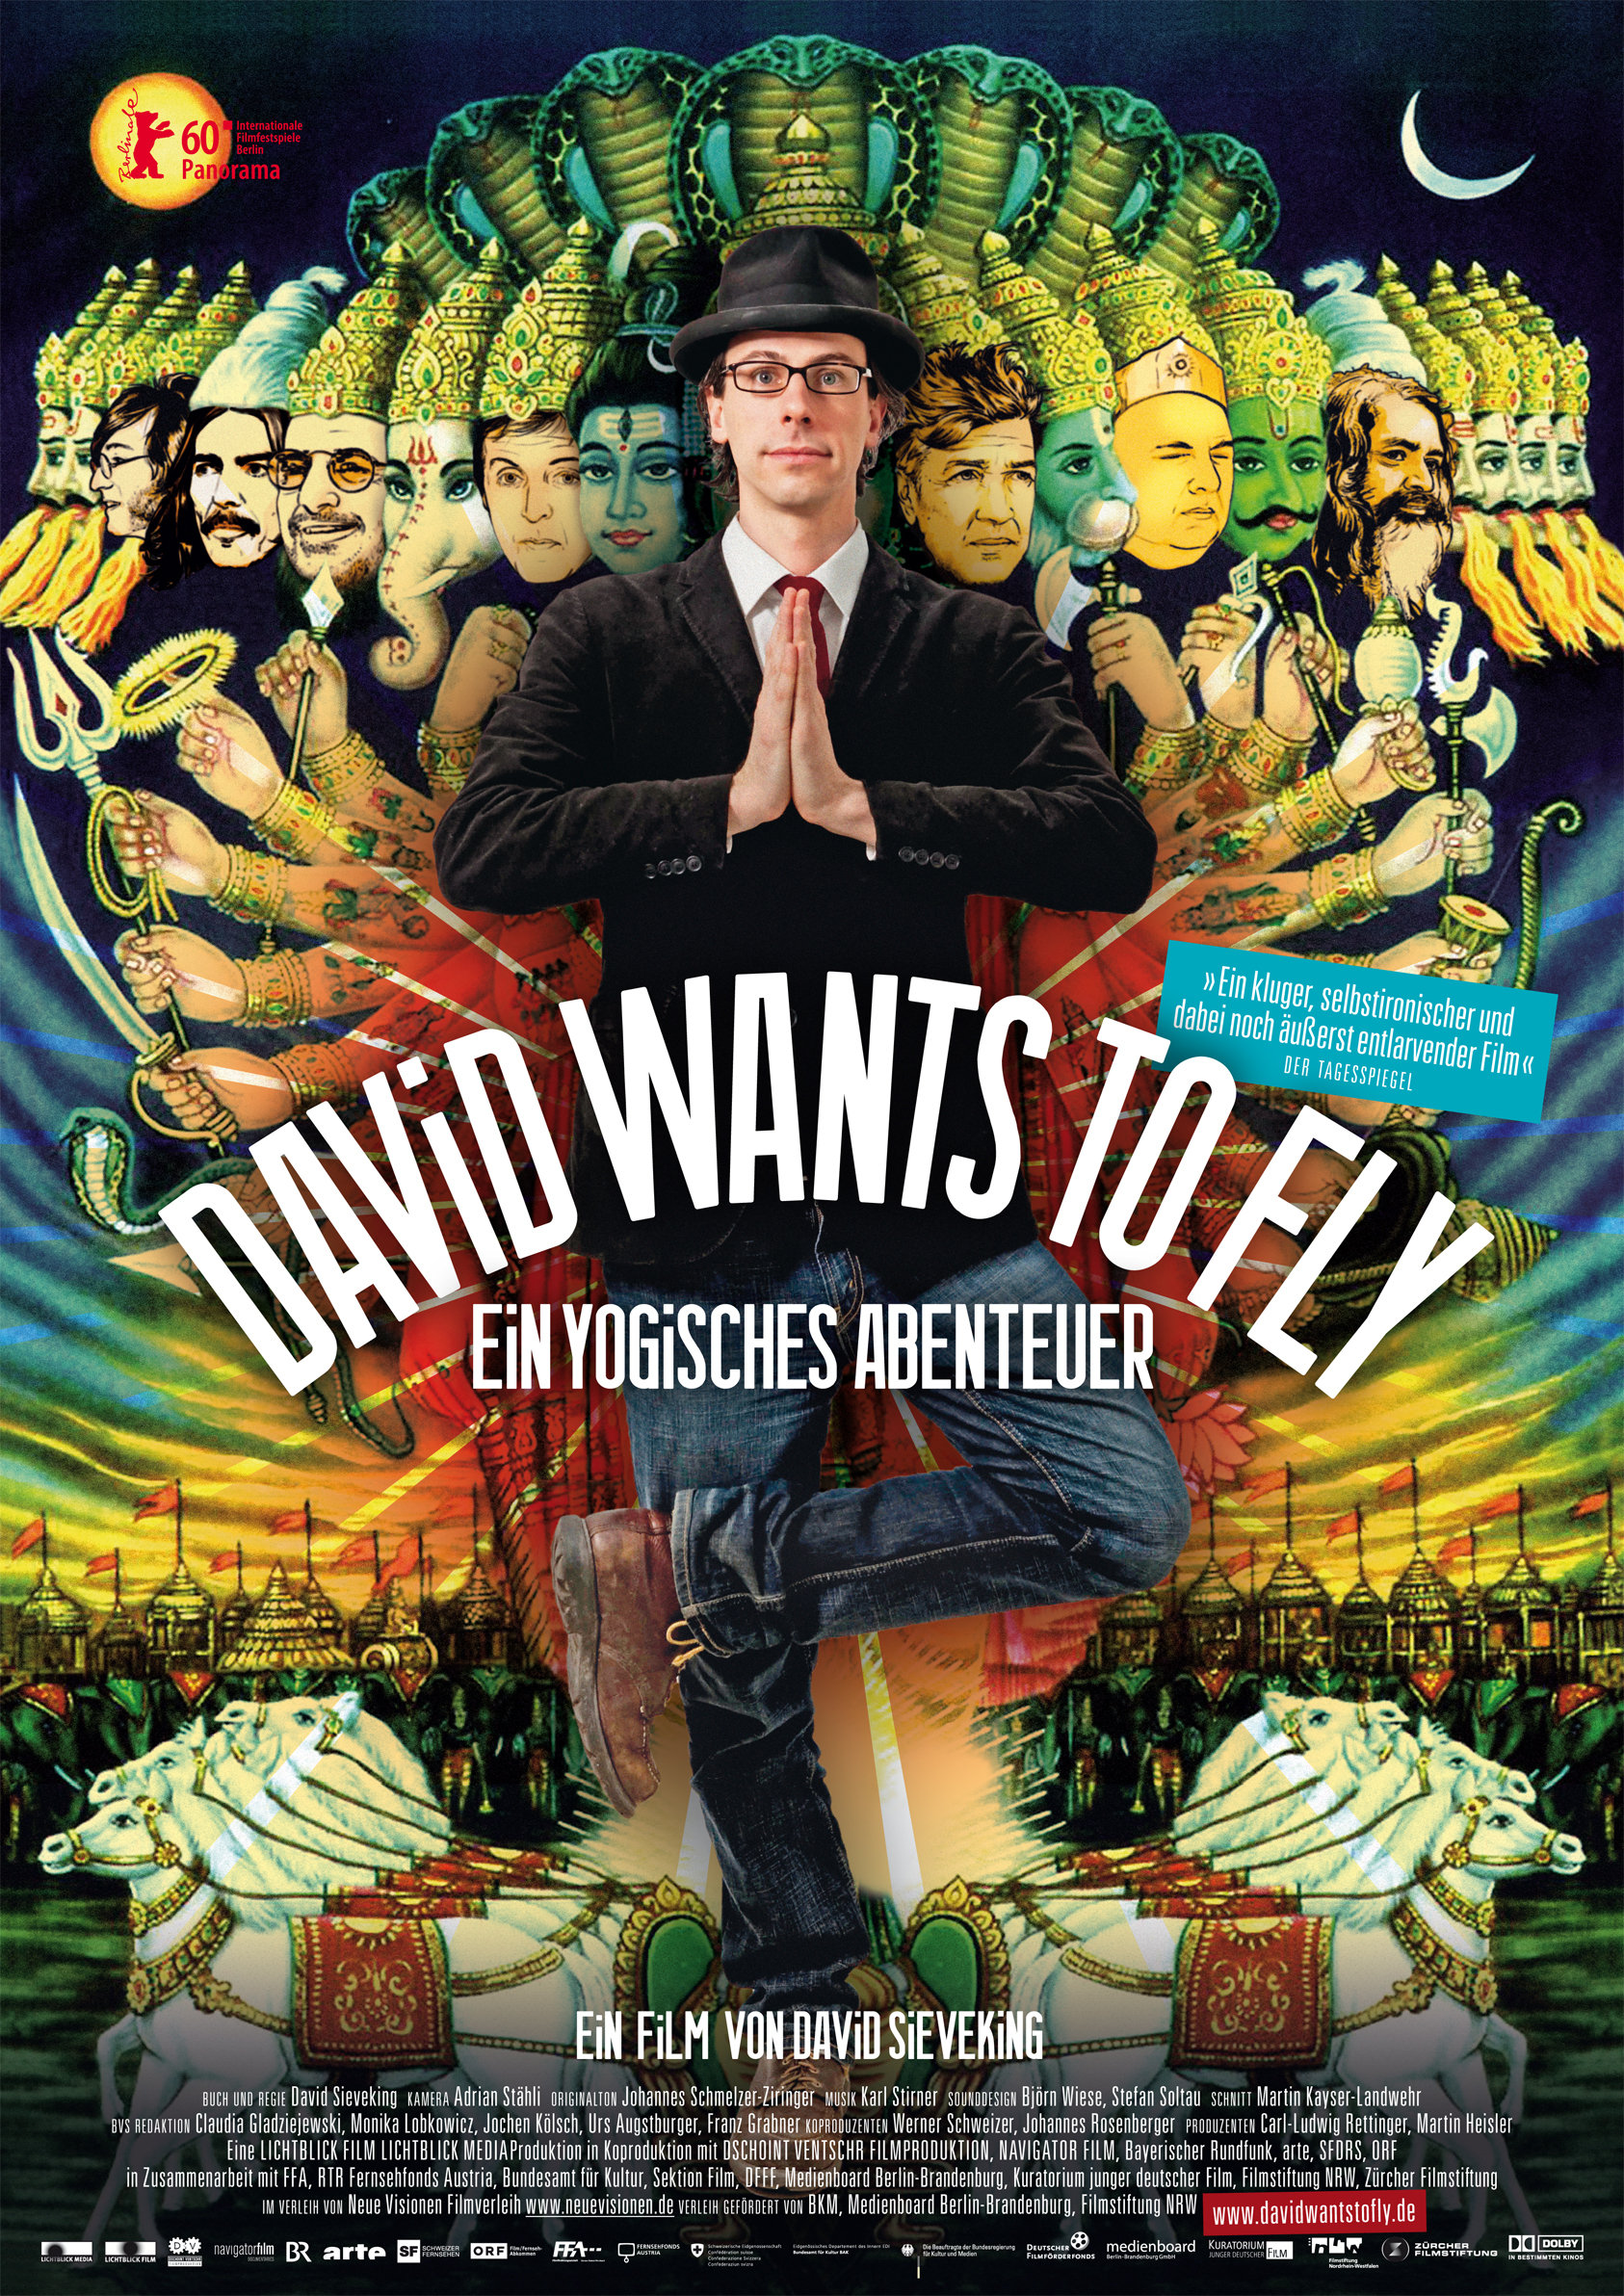 David Wants to Fly (2010) with English Subtitles on DVD on DVD